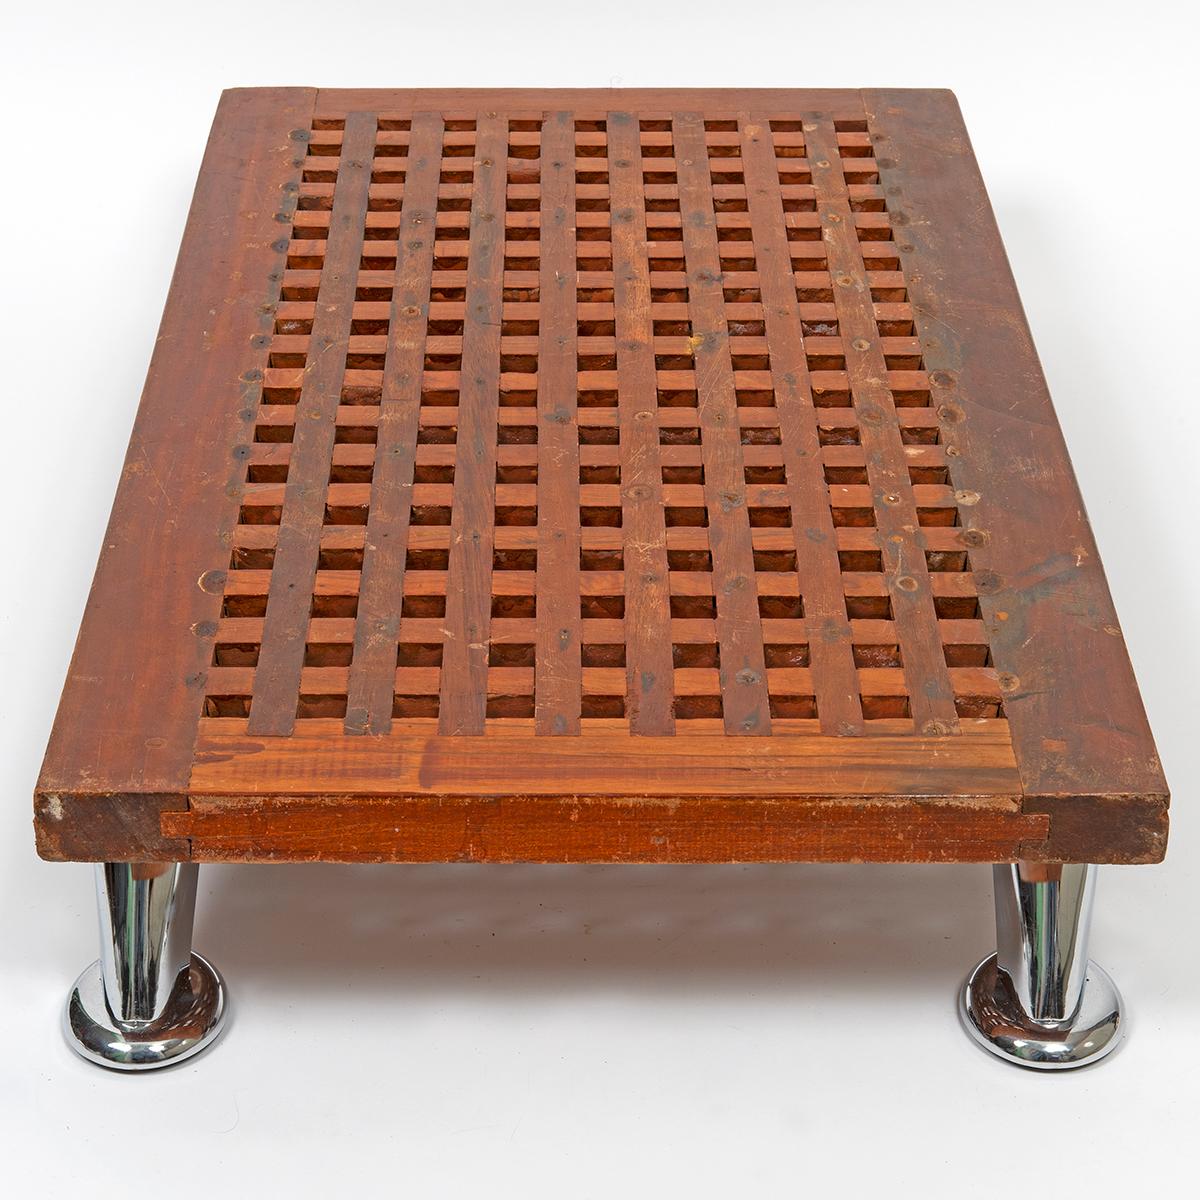 A practical coffee table using a ship's grating (above the captains cabin) with fitted legs. This grating comes from a Royal Navy vessel, is beautifully weathered and would ideally suit an inside or outside / conservatory environment. We date the